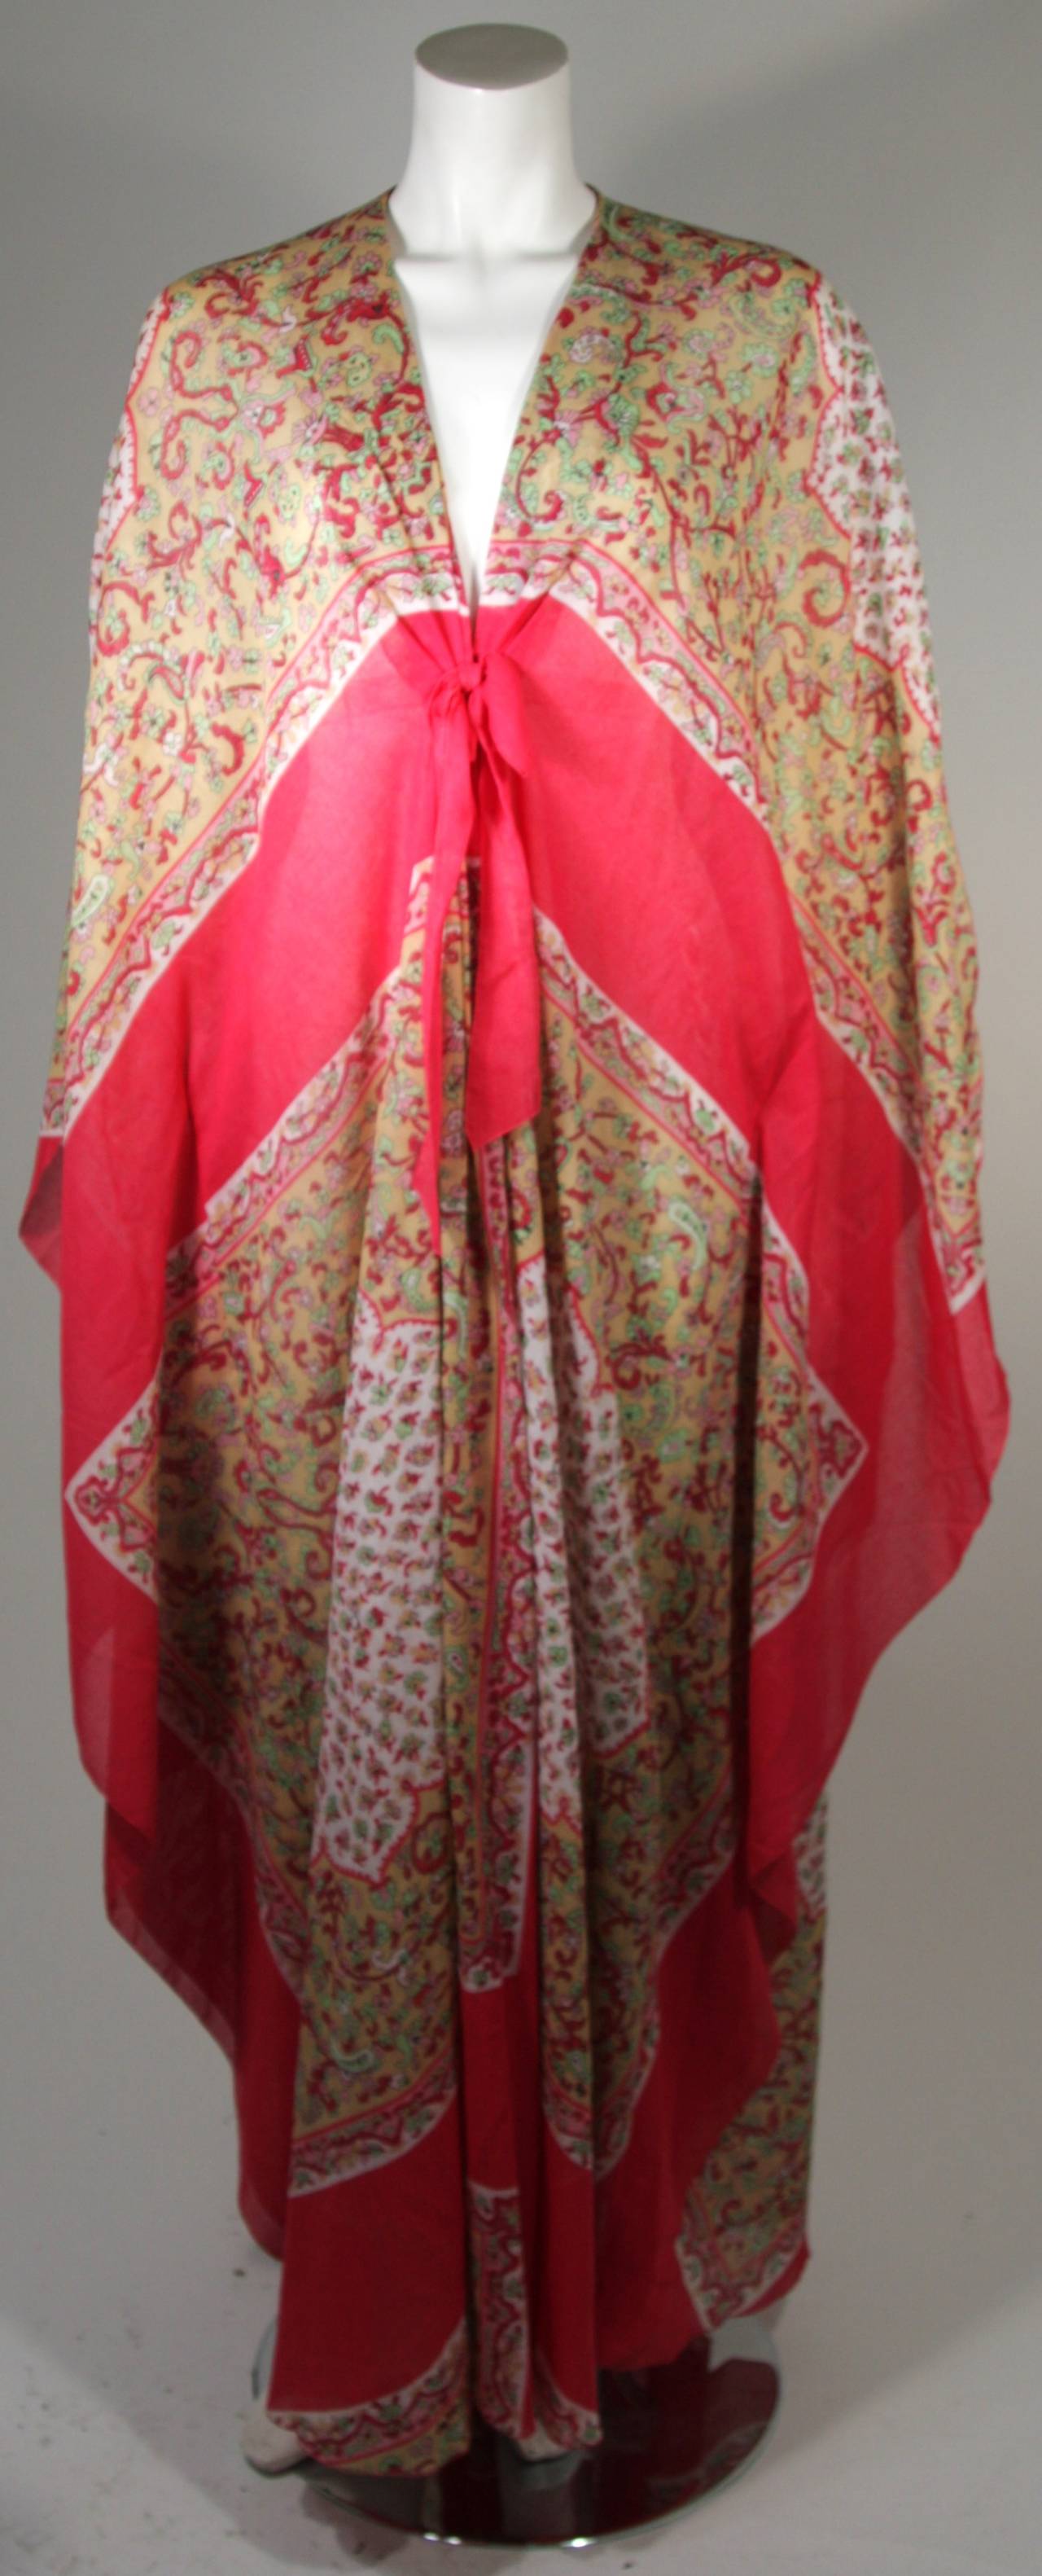 This Lucie Ann kaftan is composed of a lightweight cotton featuring a floral motif in hues of red, yellow, white, and green. An absolutely wonderful textile print. In excellent condition. There is a center front tie at the bust, and elastic interior